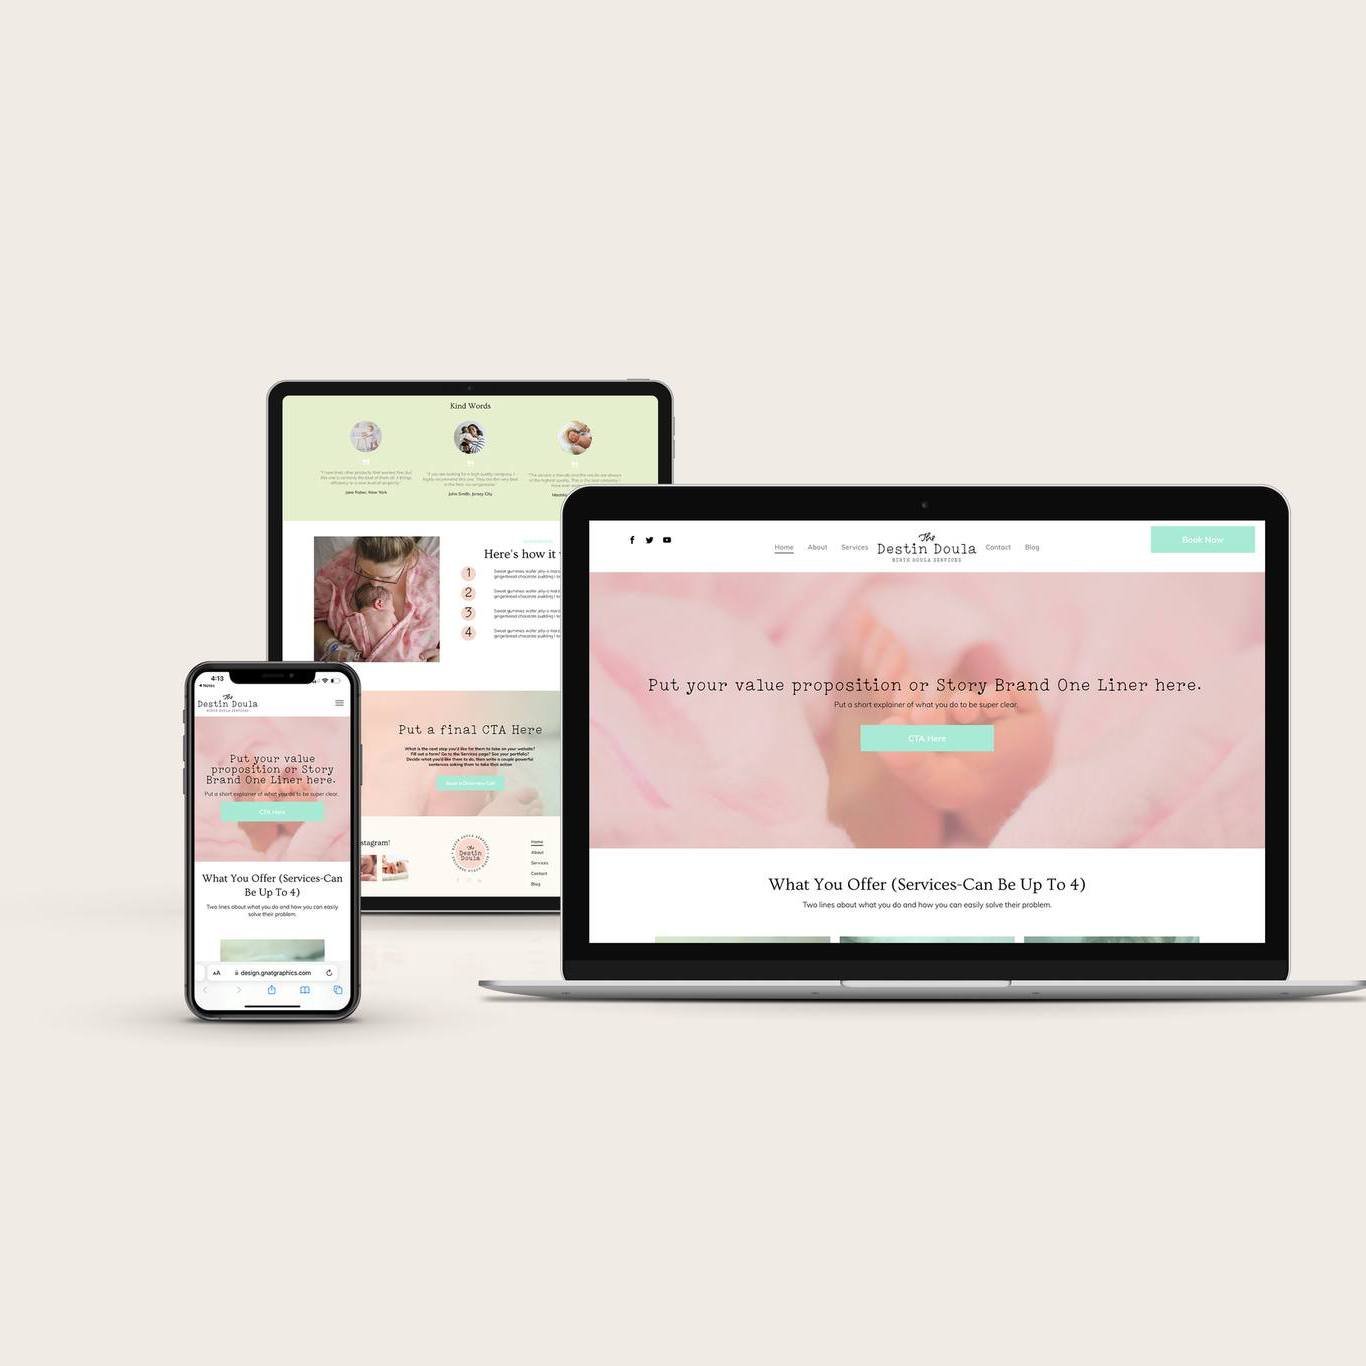 🌟📲 Calling all new doulas! 

Don't let website worries stall your amazing journey. 

Our doula website templates are tailored to get you online and visible to clients faster than ever. 

Professional, gorgeous, and easy to use - everything you need